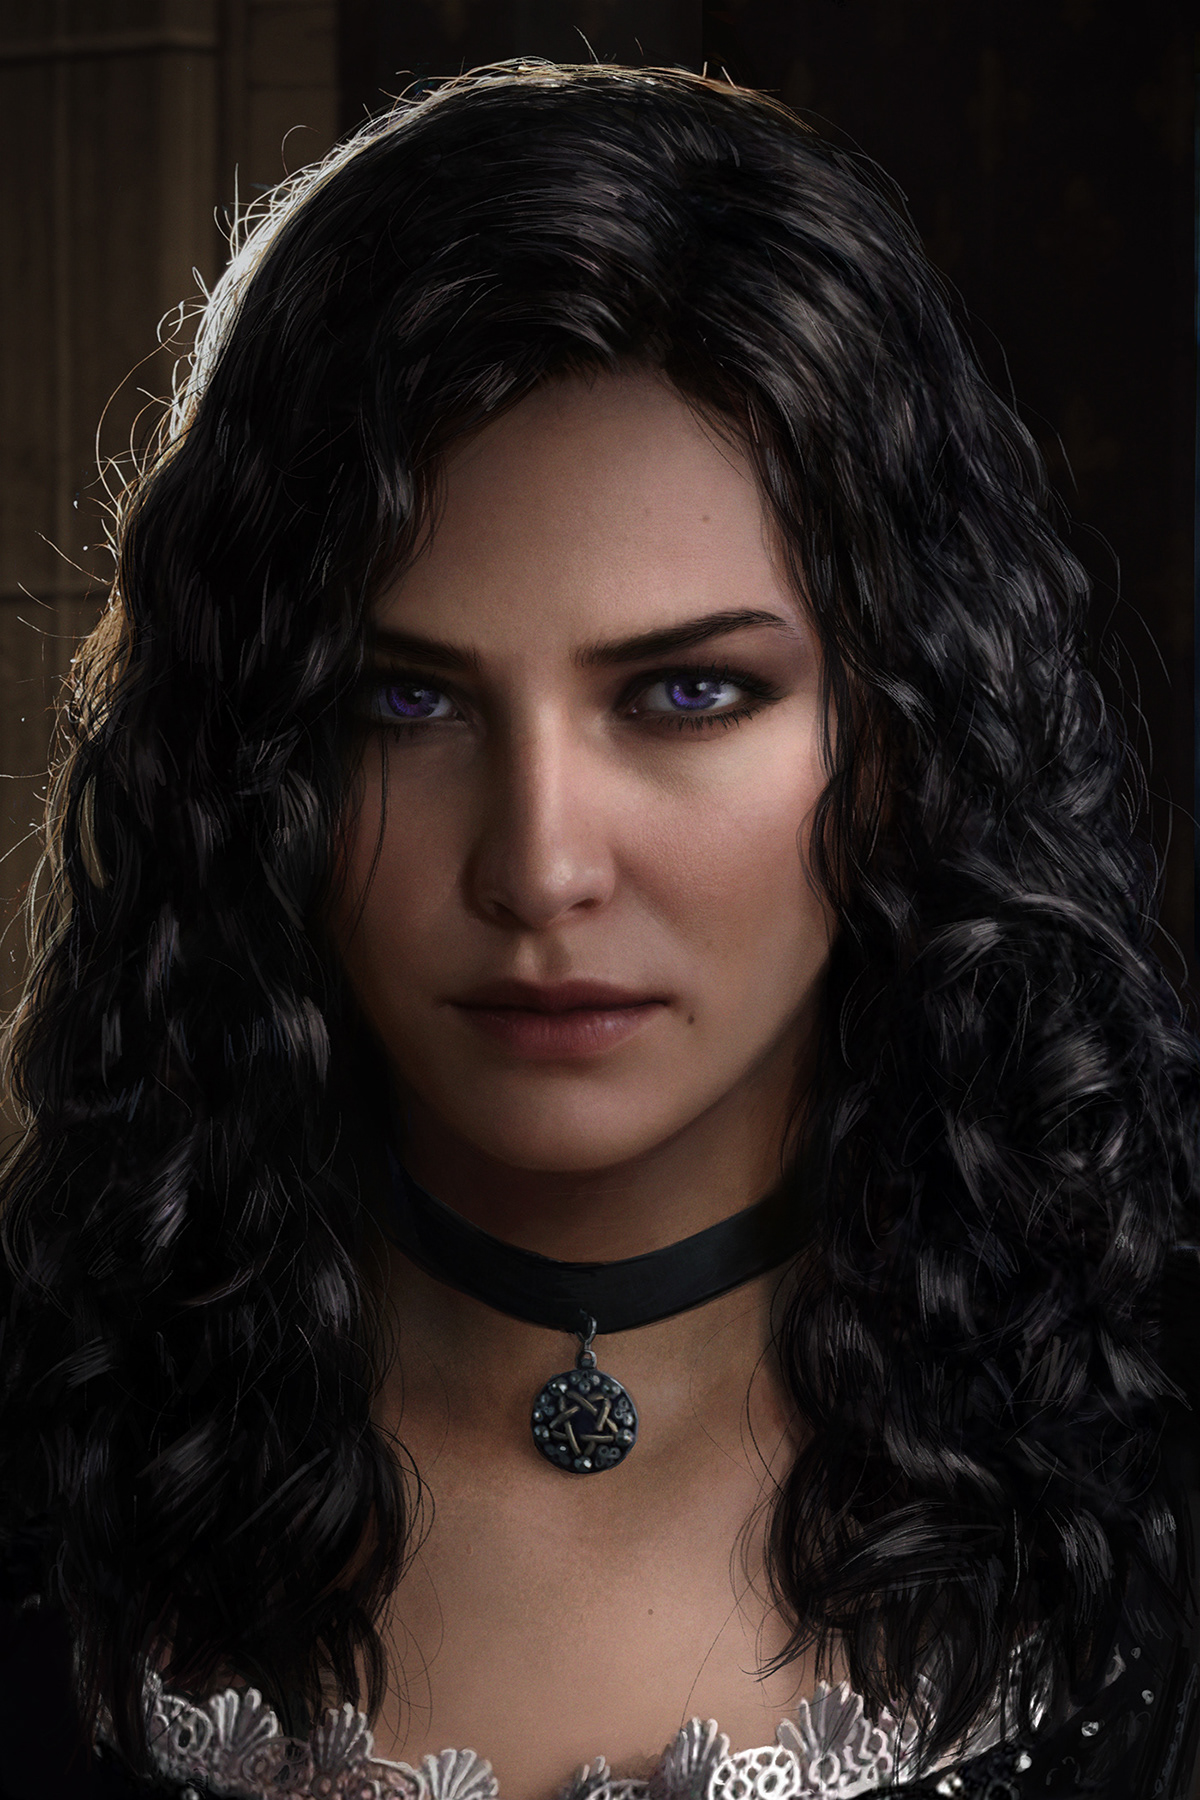 witcher Triss yennefer ciri gerald CDProjektRed Gaming portrait realistic medieval